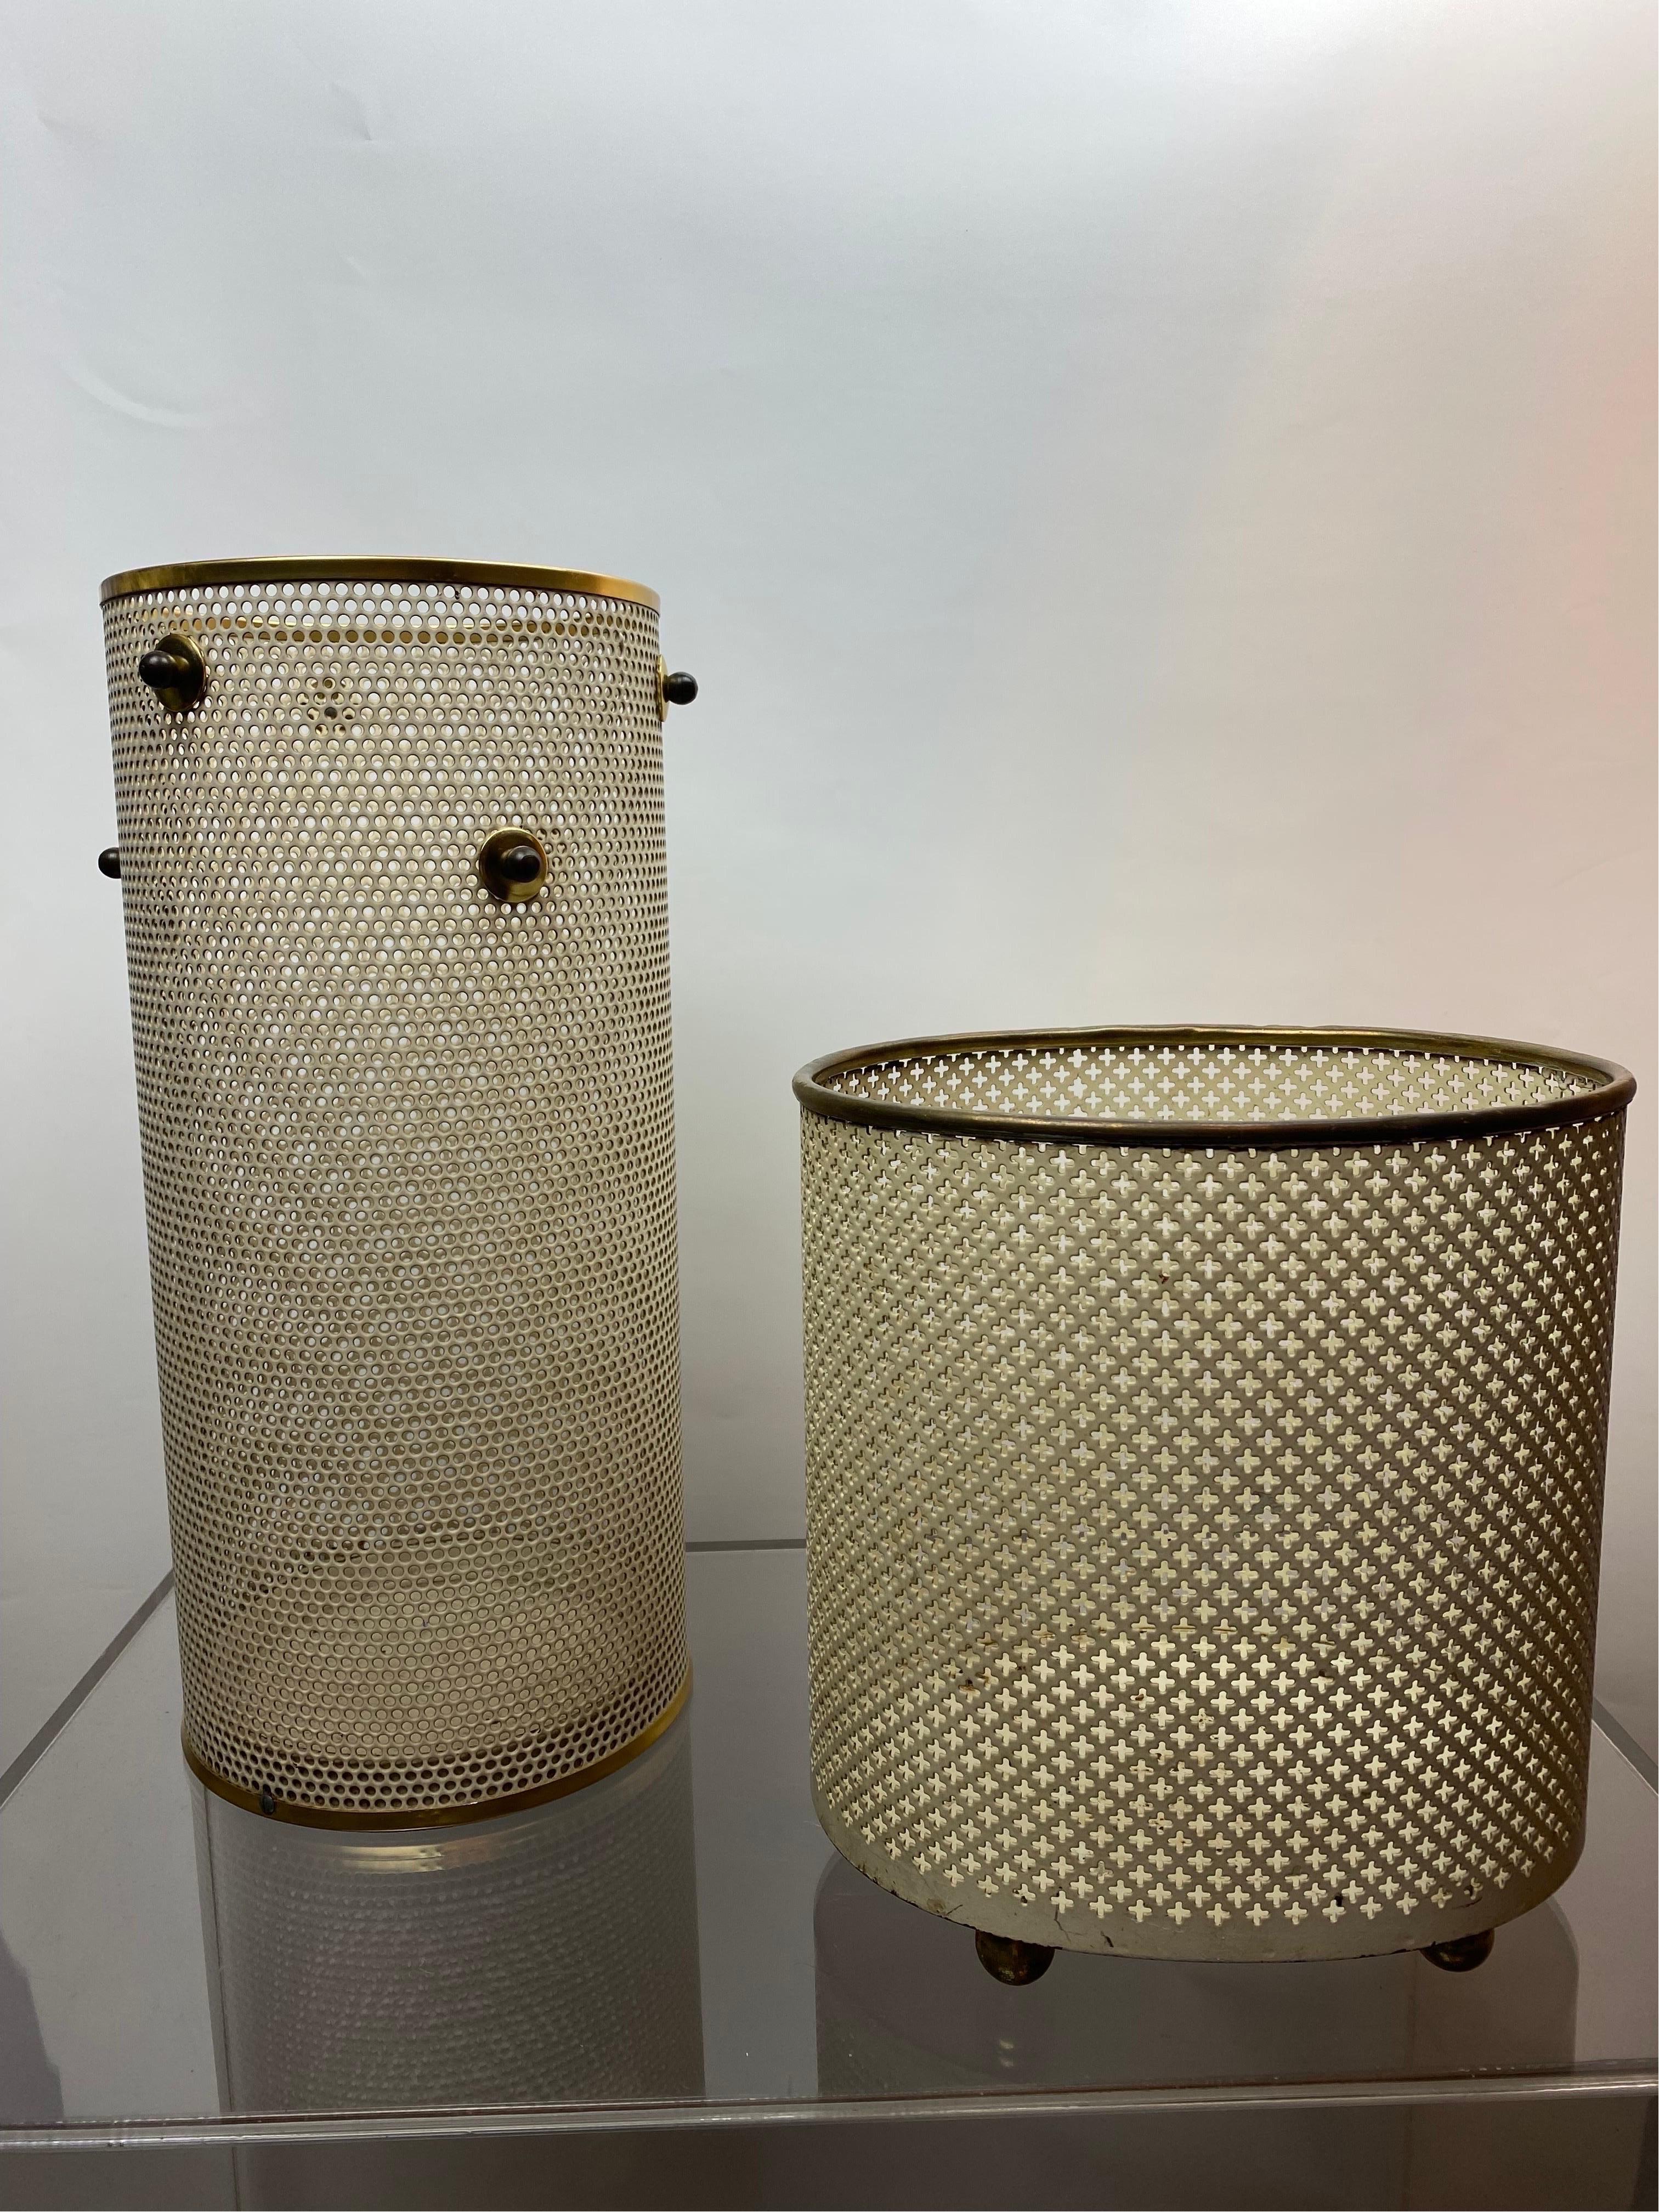 Umbrella Stand Mategot 50s cylindrical Vase perforated metal with gold Details  For Sale 4